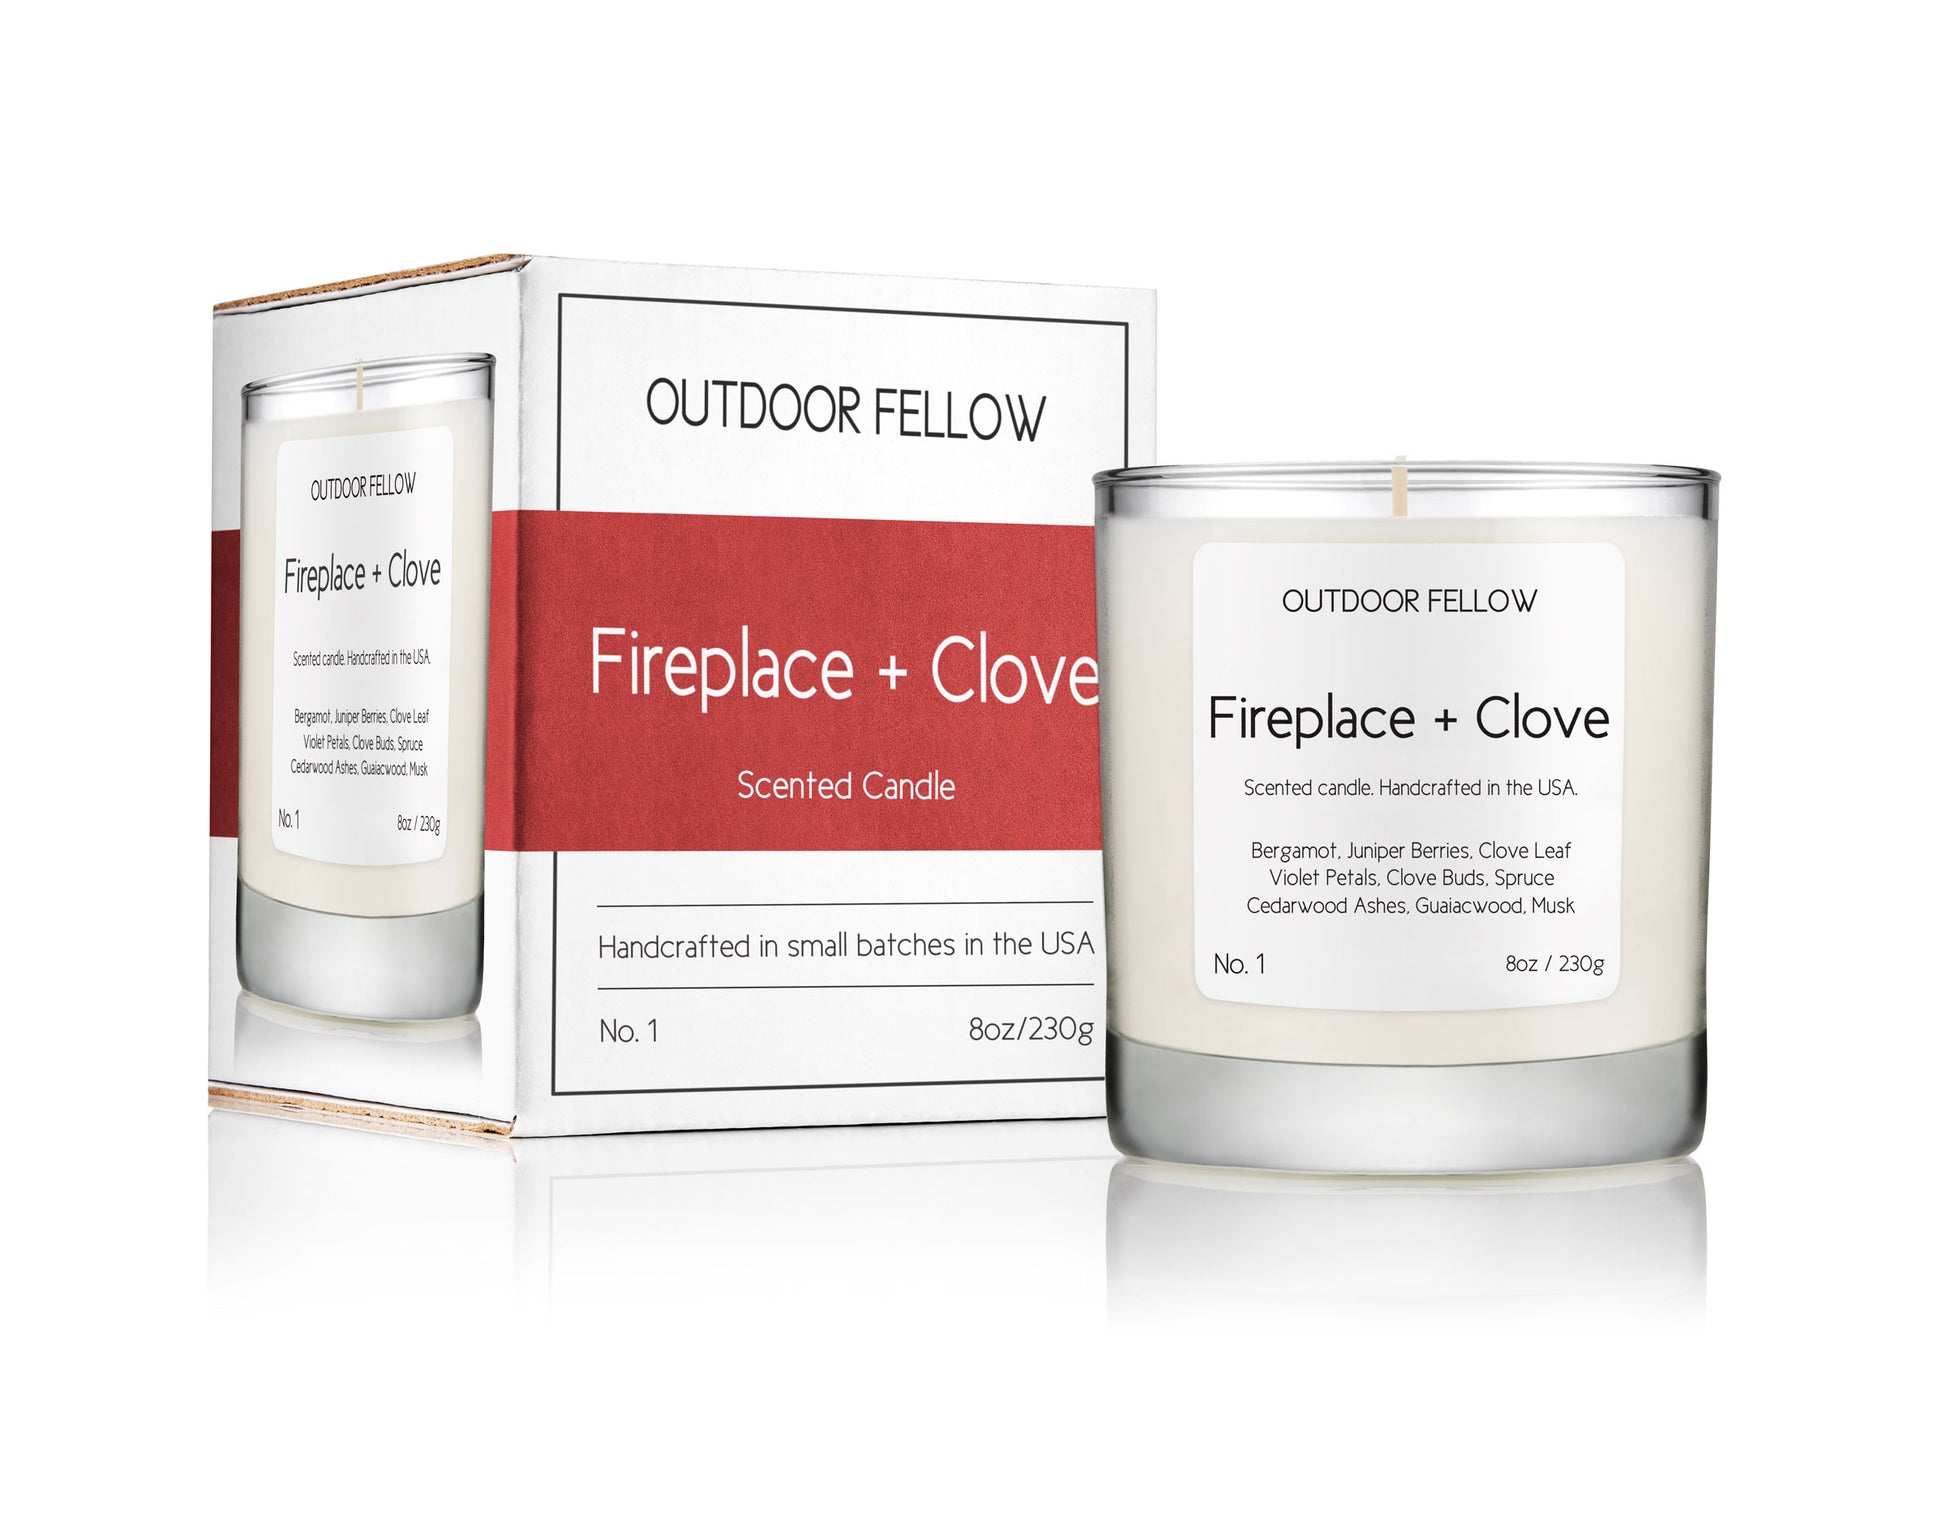 Fireplace and Clove scented candle next to packaging